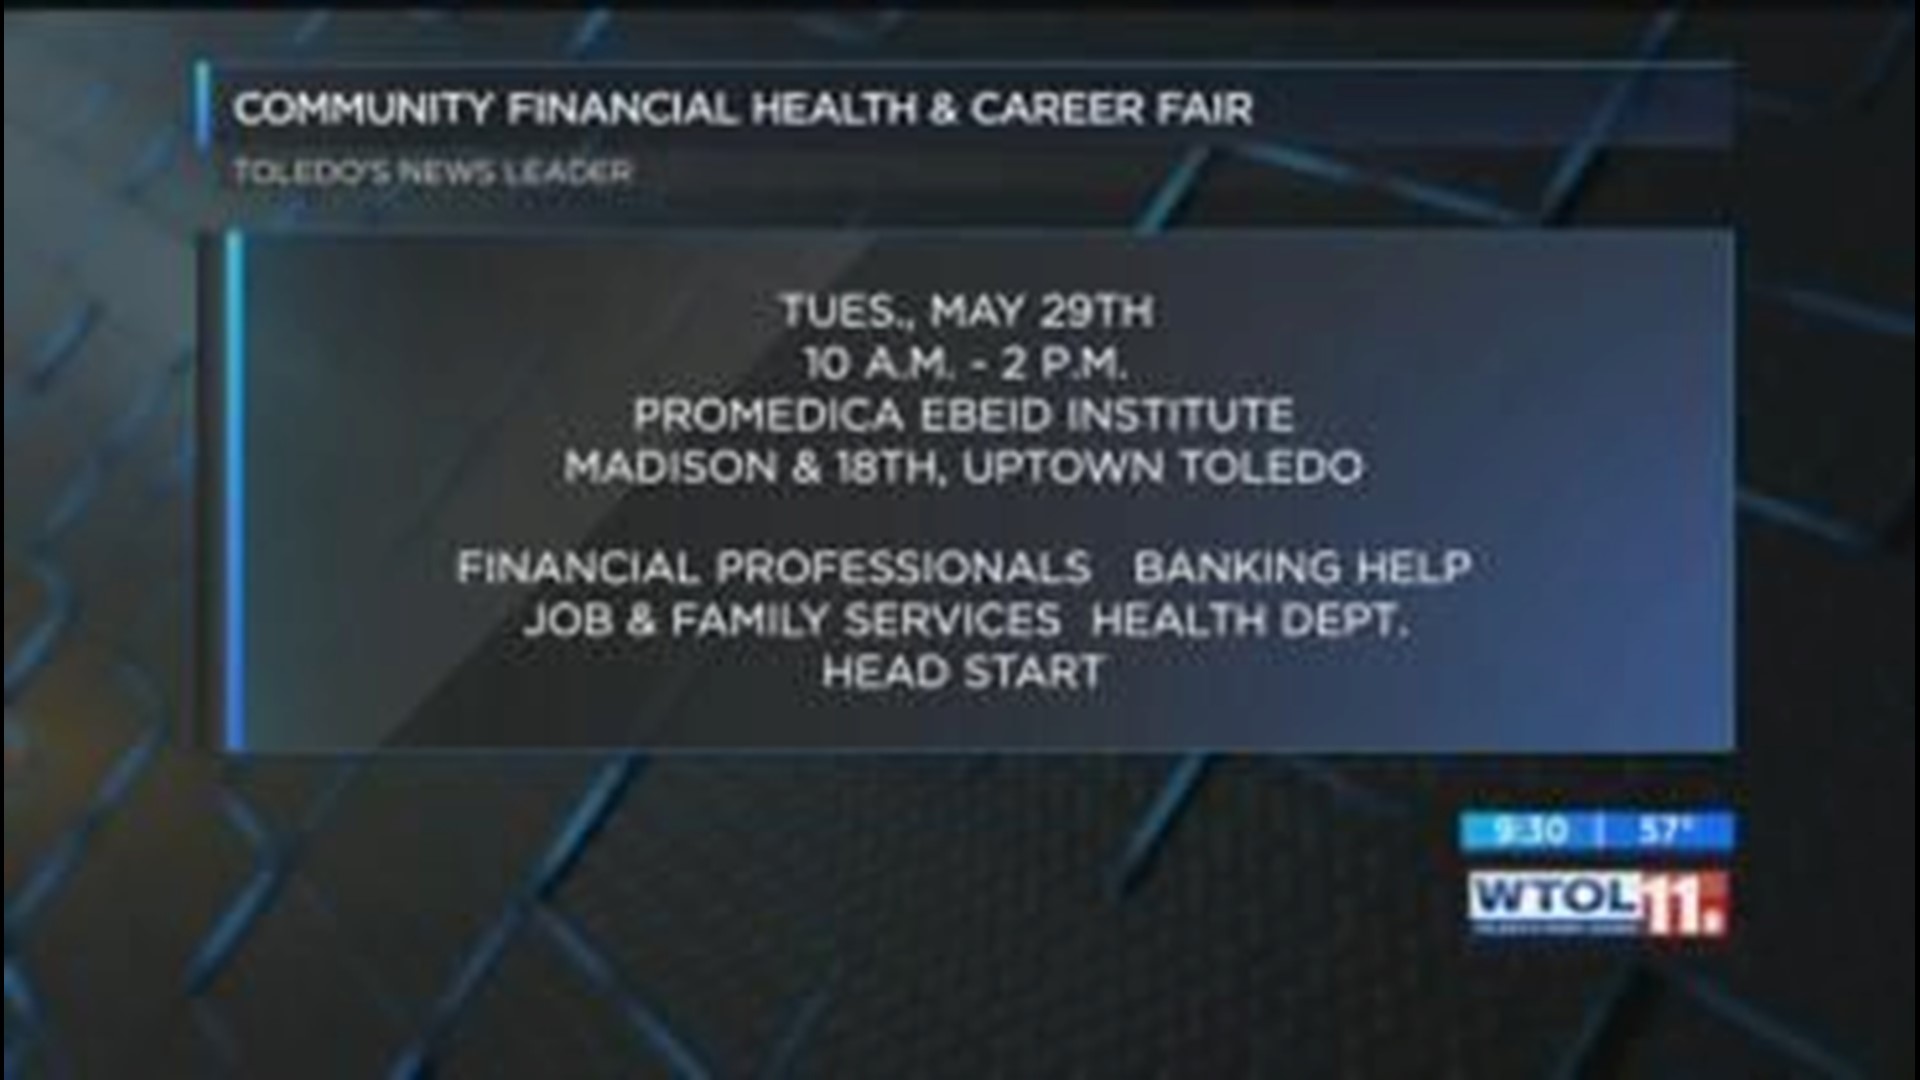 Free services available next Tues. for those struggling financially